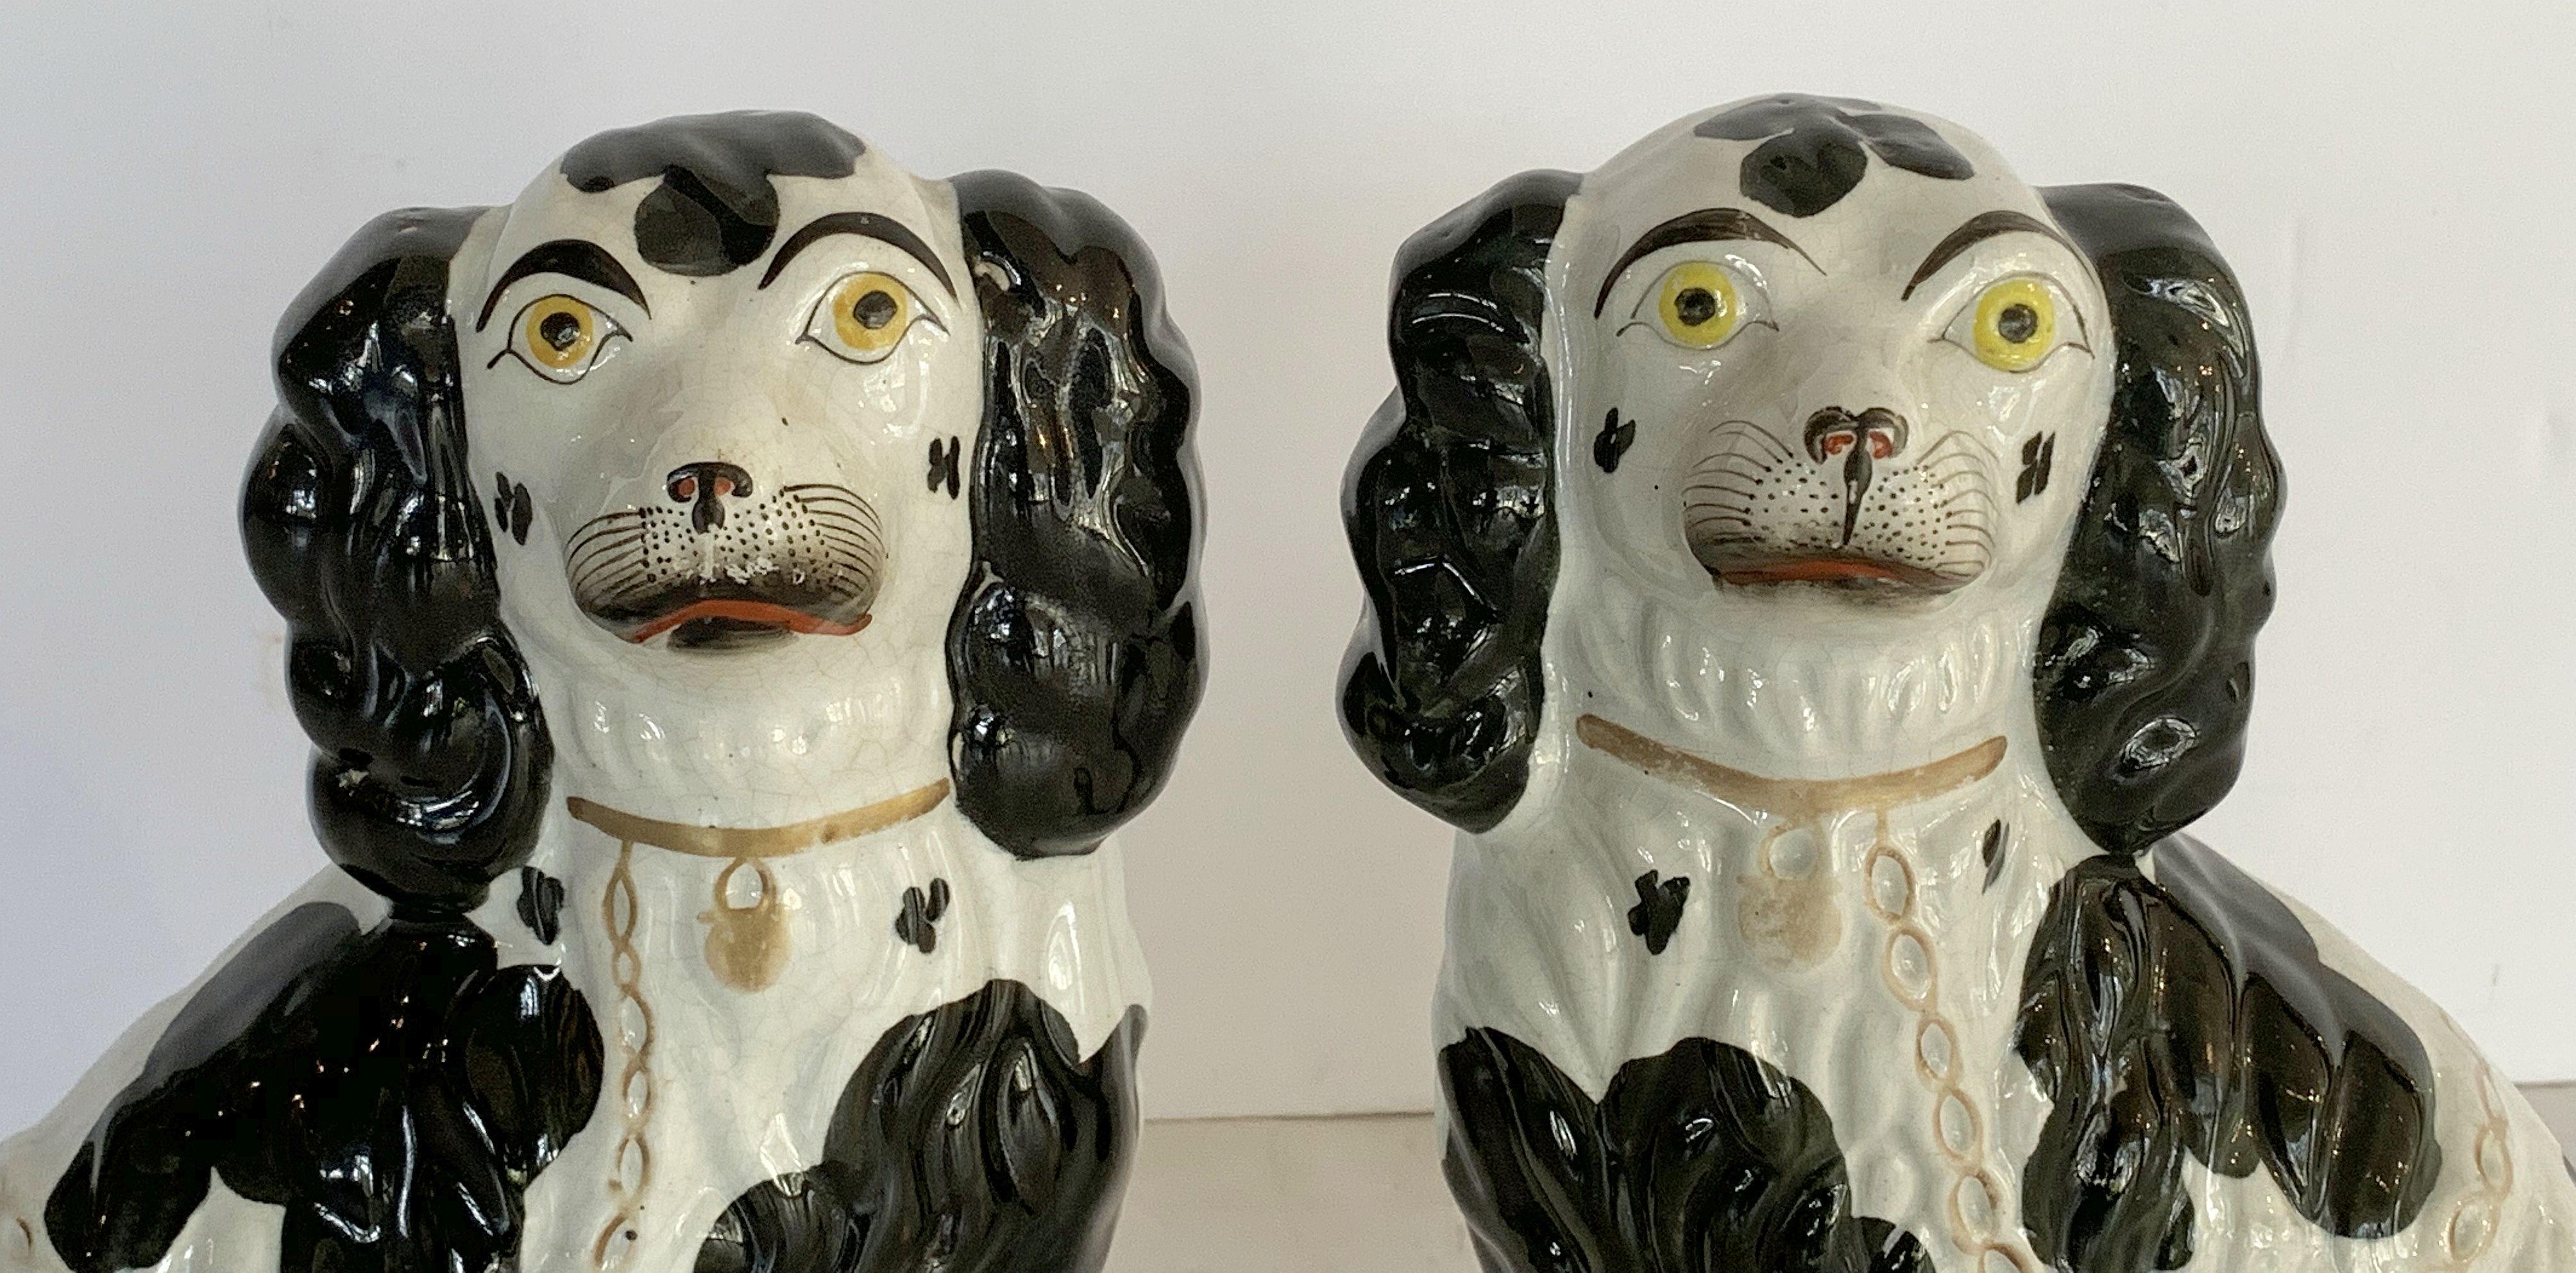 Glazed 19th Century English Staffordshire King Charles Spaniels (Priced as a Pair)